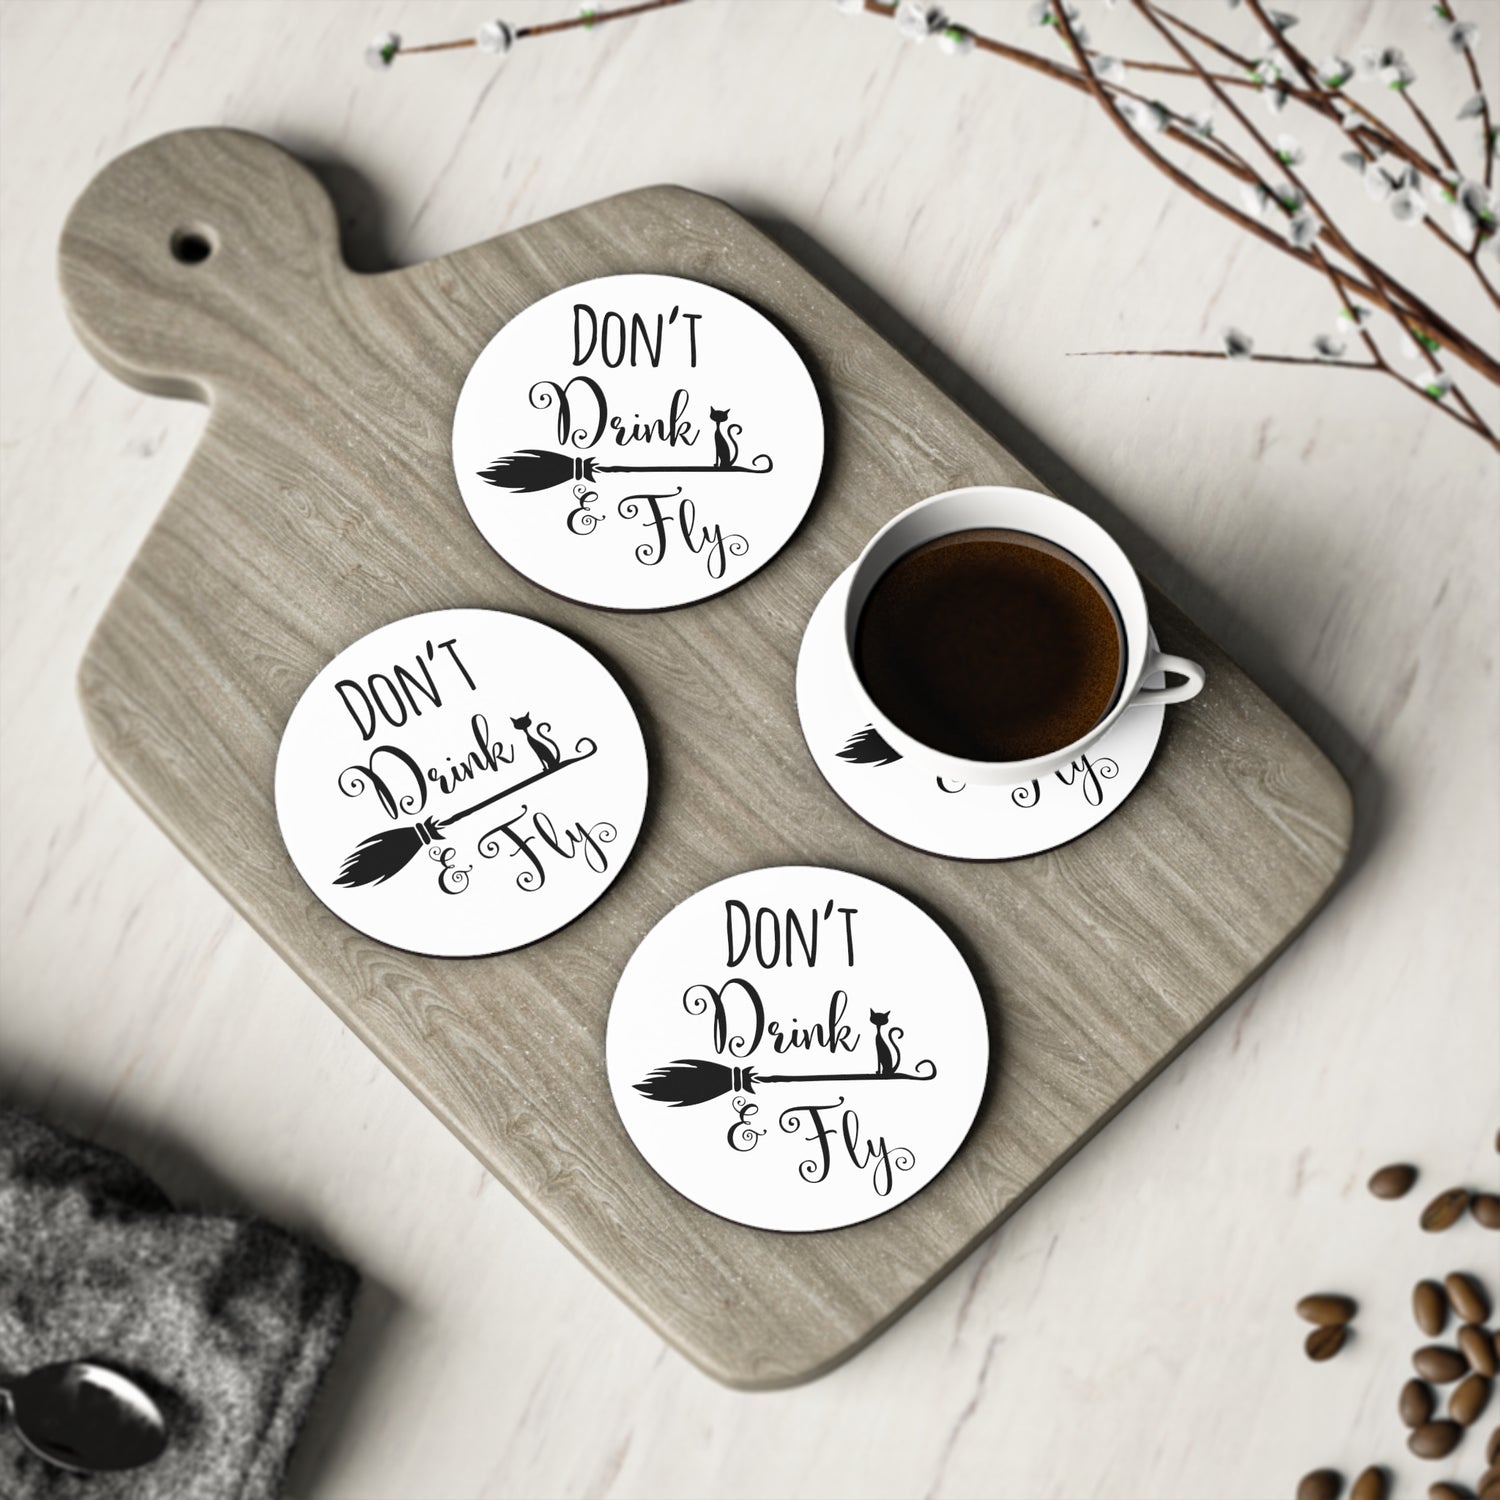 Don't Drink & Fly Coasters - Witchy Kitchens